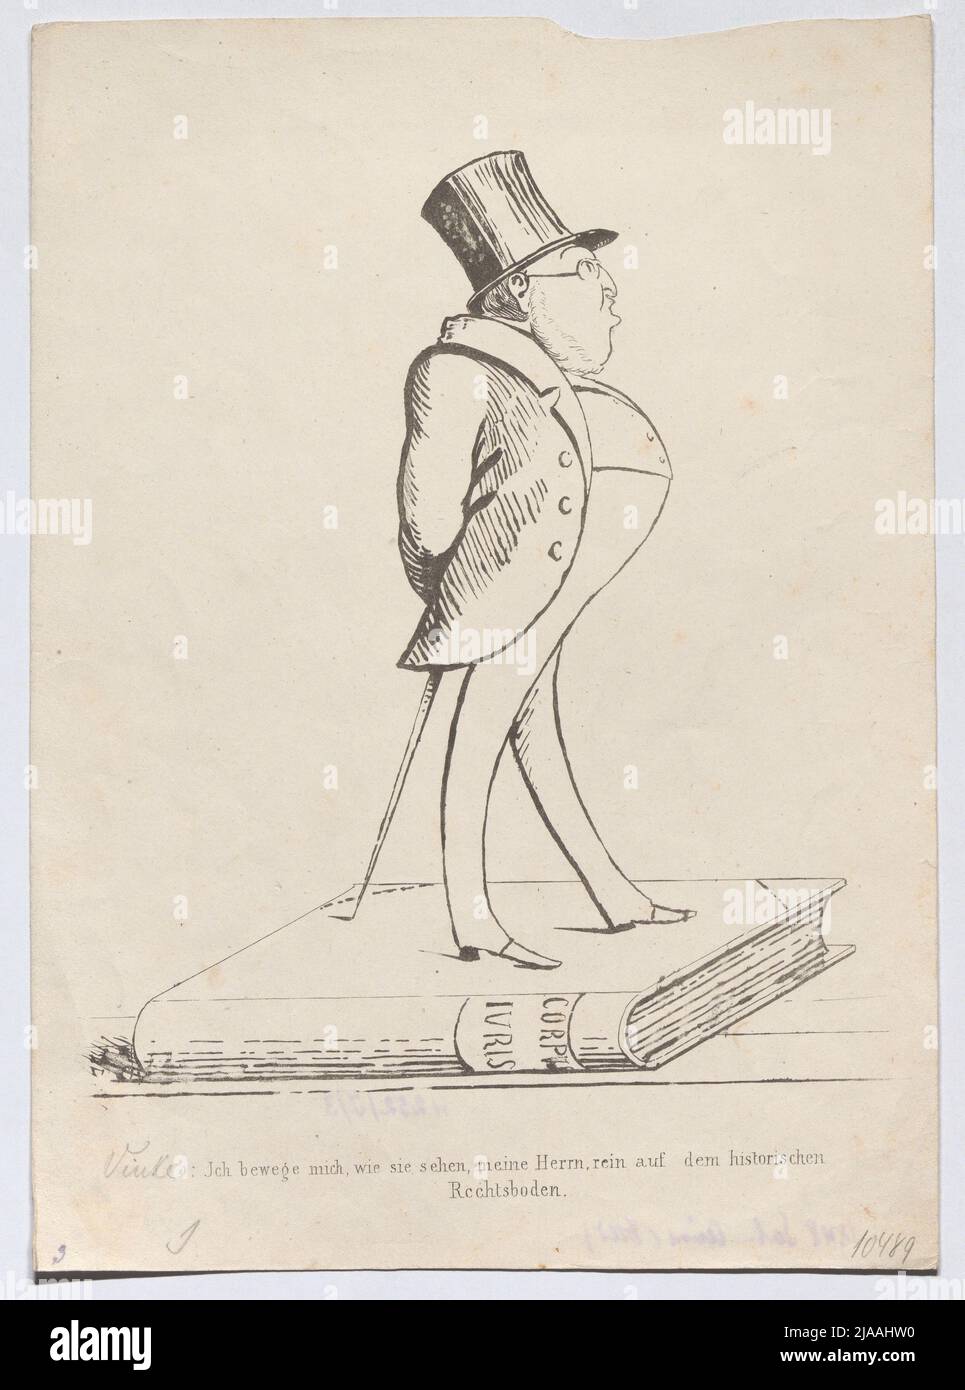 'I move as you see, gentlemen, purely on the historical / right floor.' (Caricature on Georg von Vincke, MP of the National Assembly in Frankfurt 1848). Gerhard Malß (1819-1885), Lithographer, Eduard Gustav May (1818-1907), publisher Stock Photo